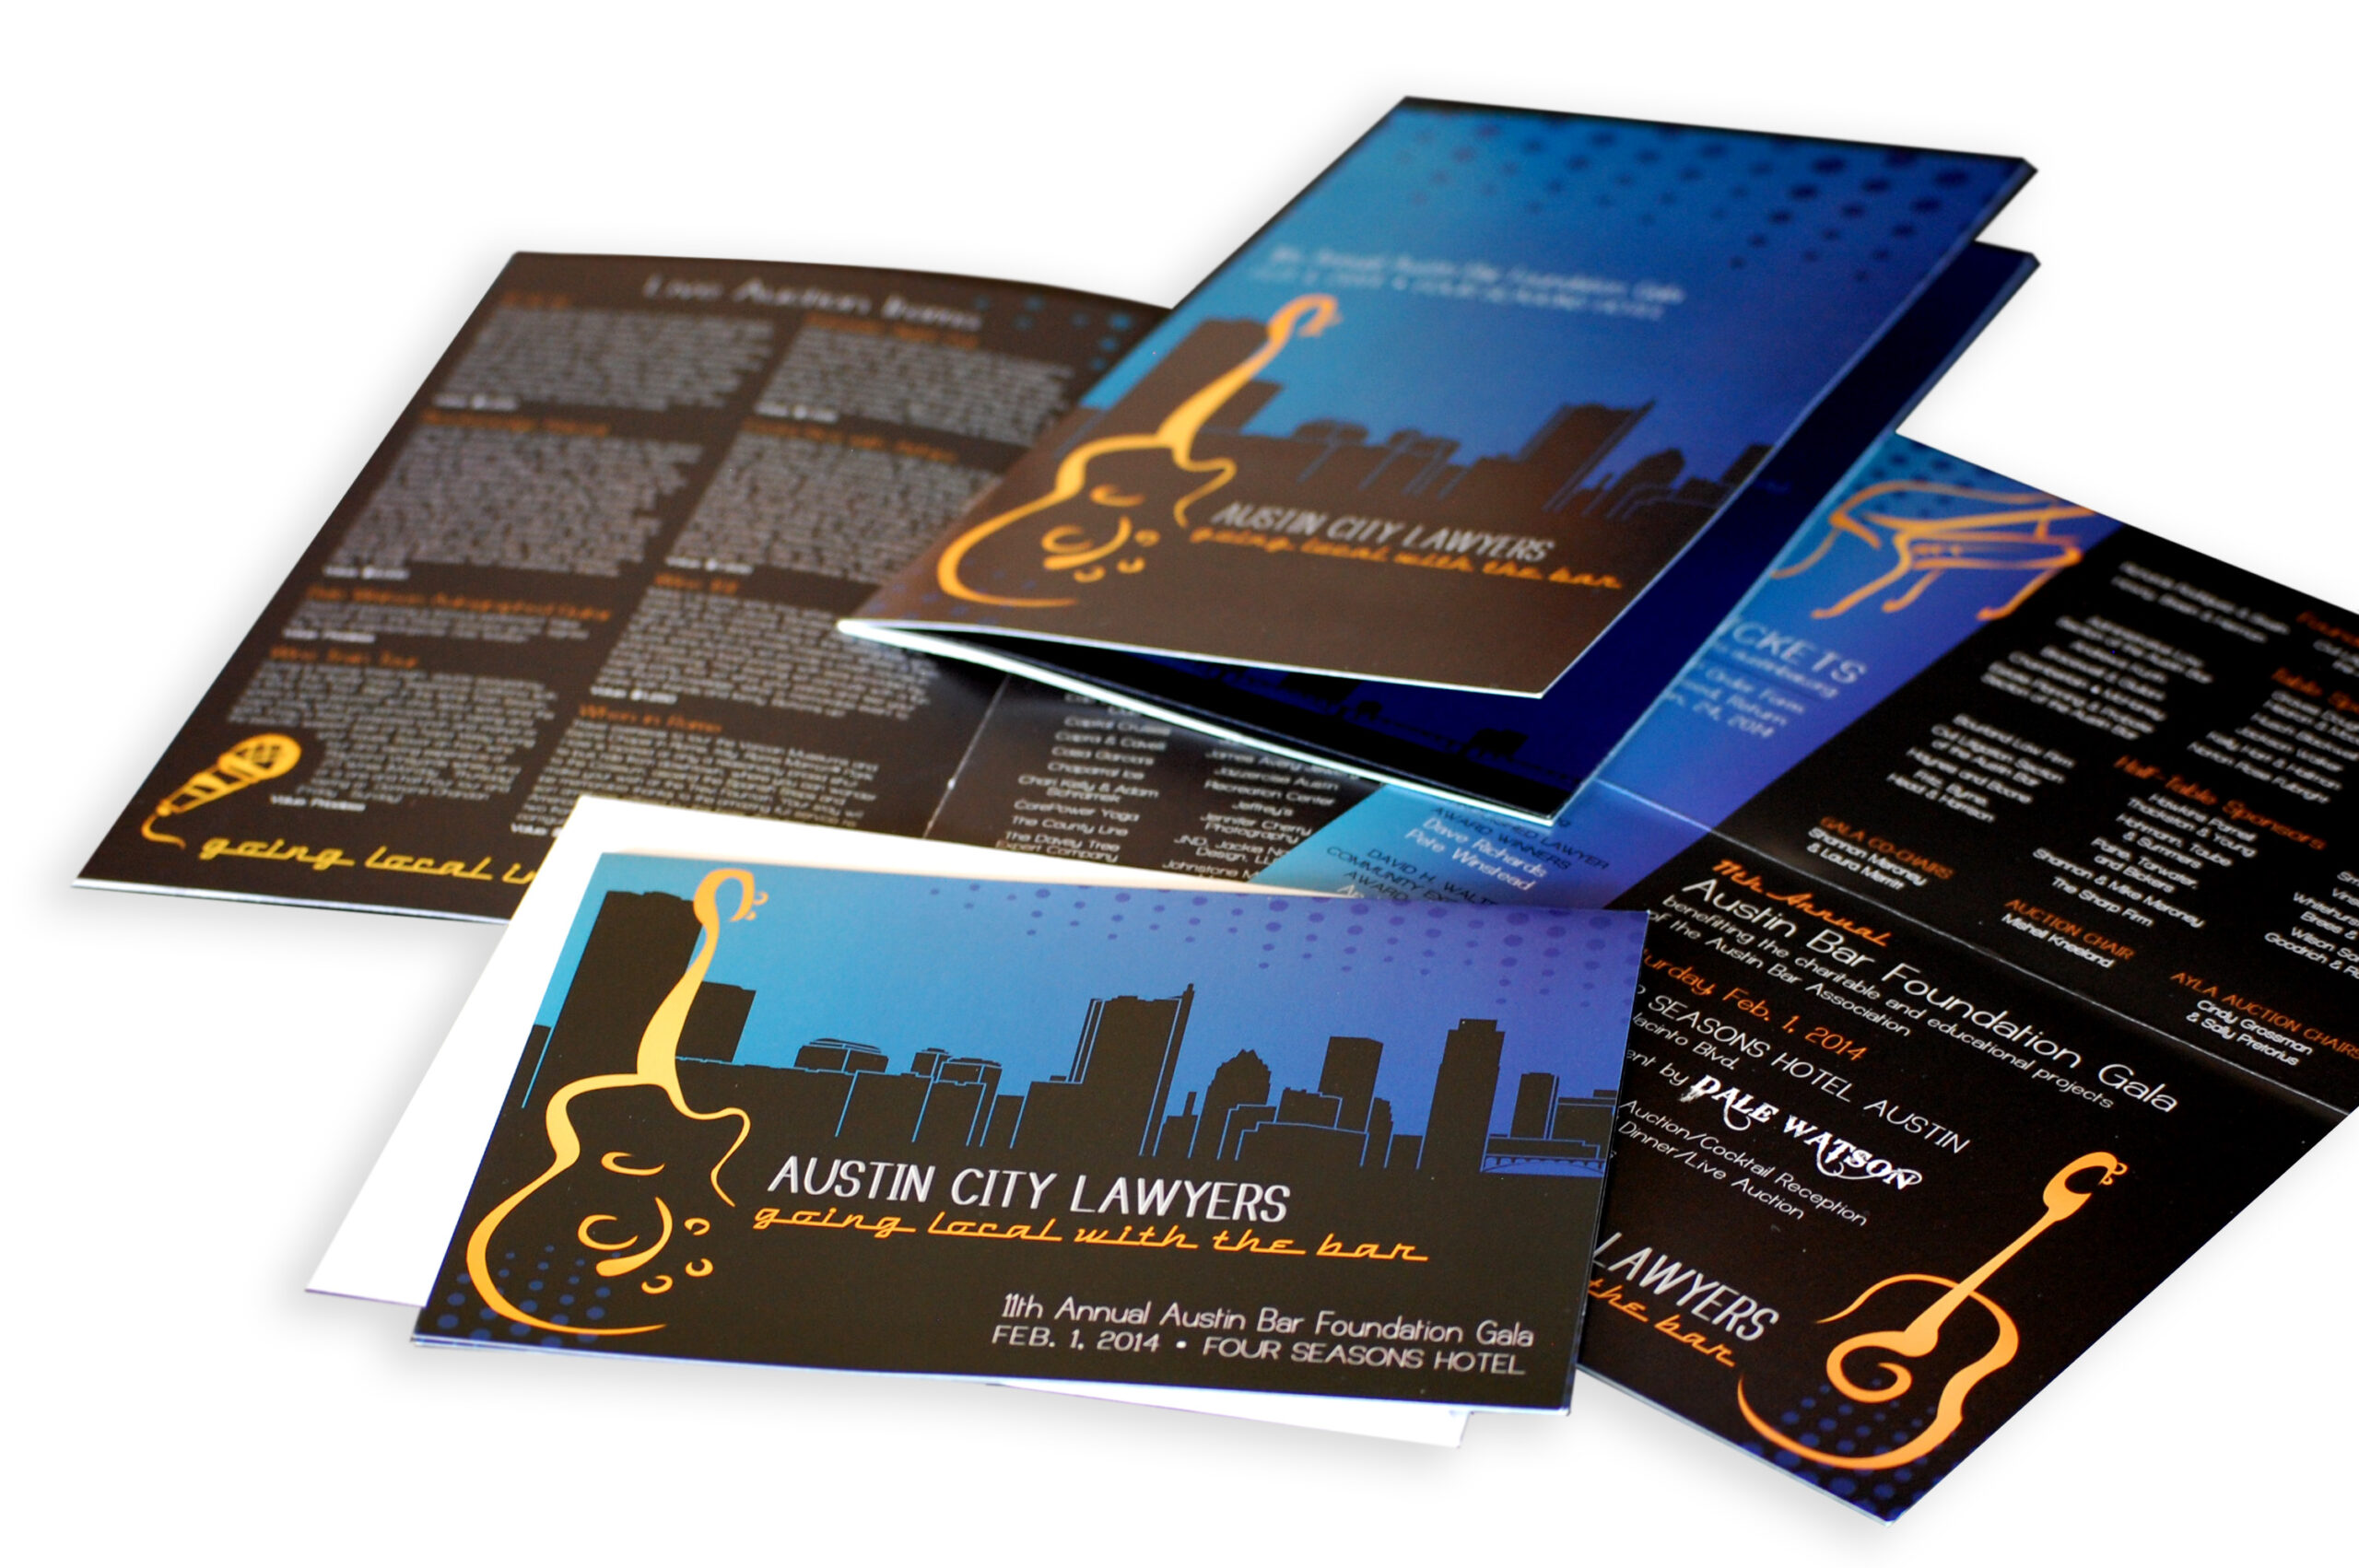 Event Collateral